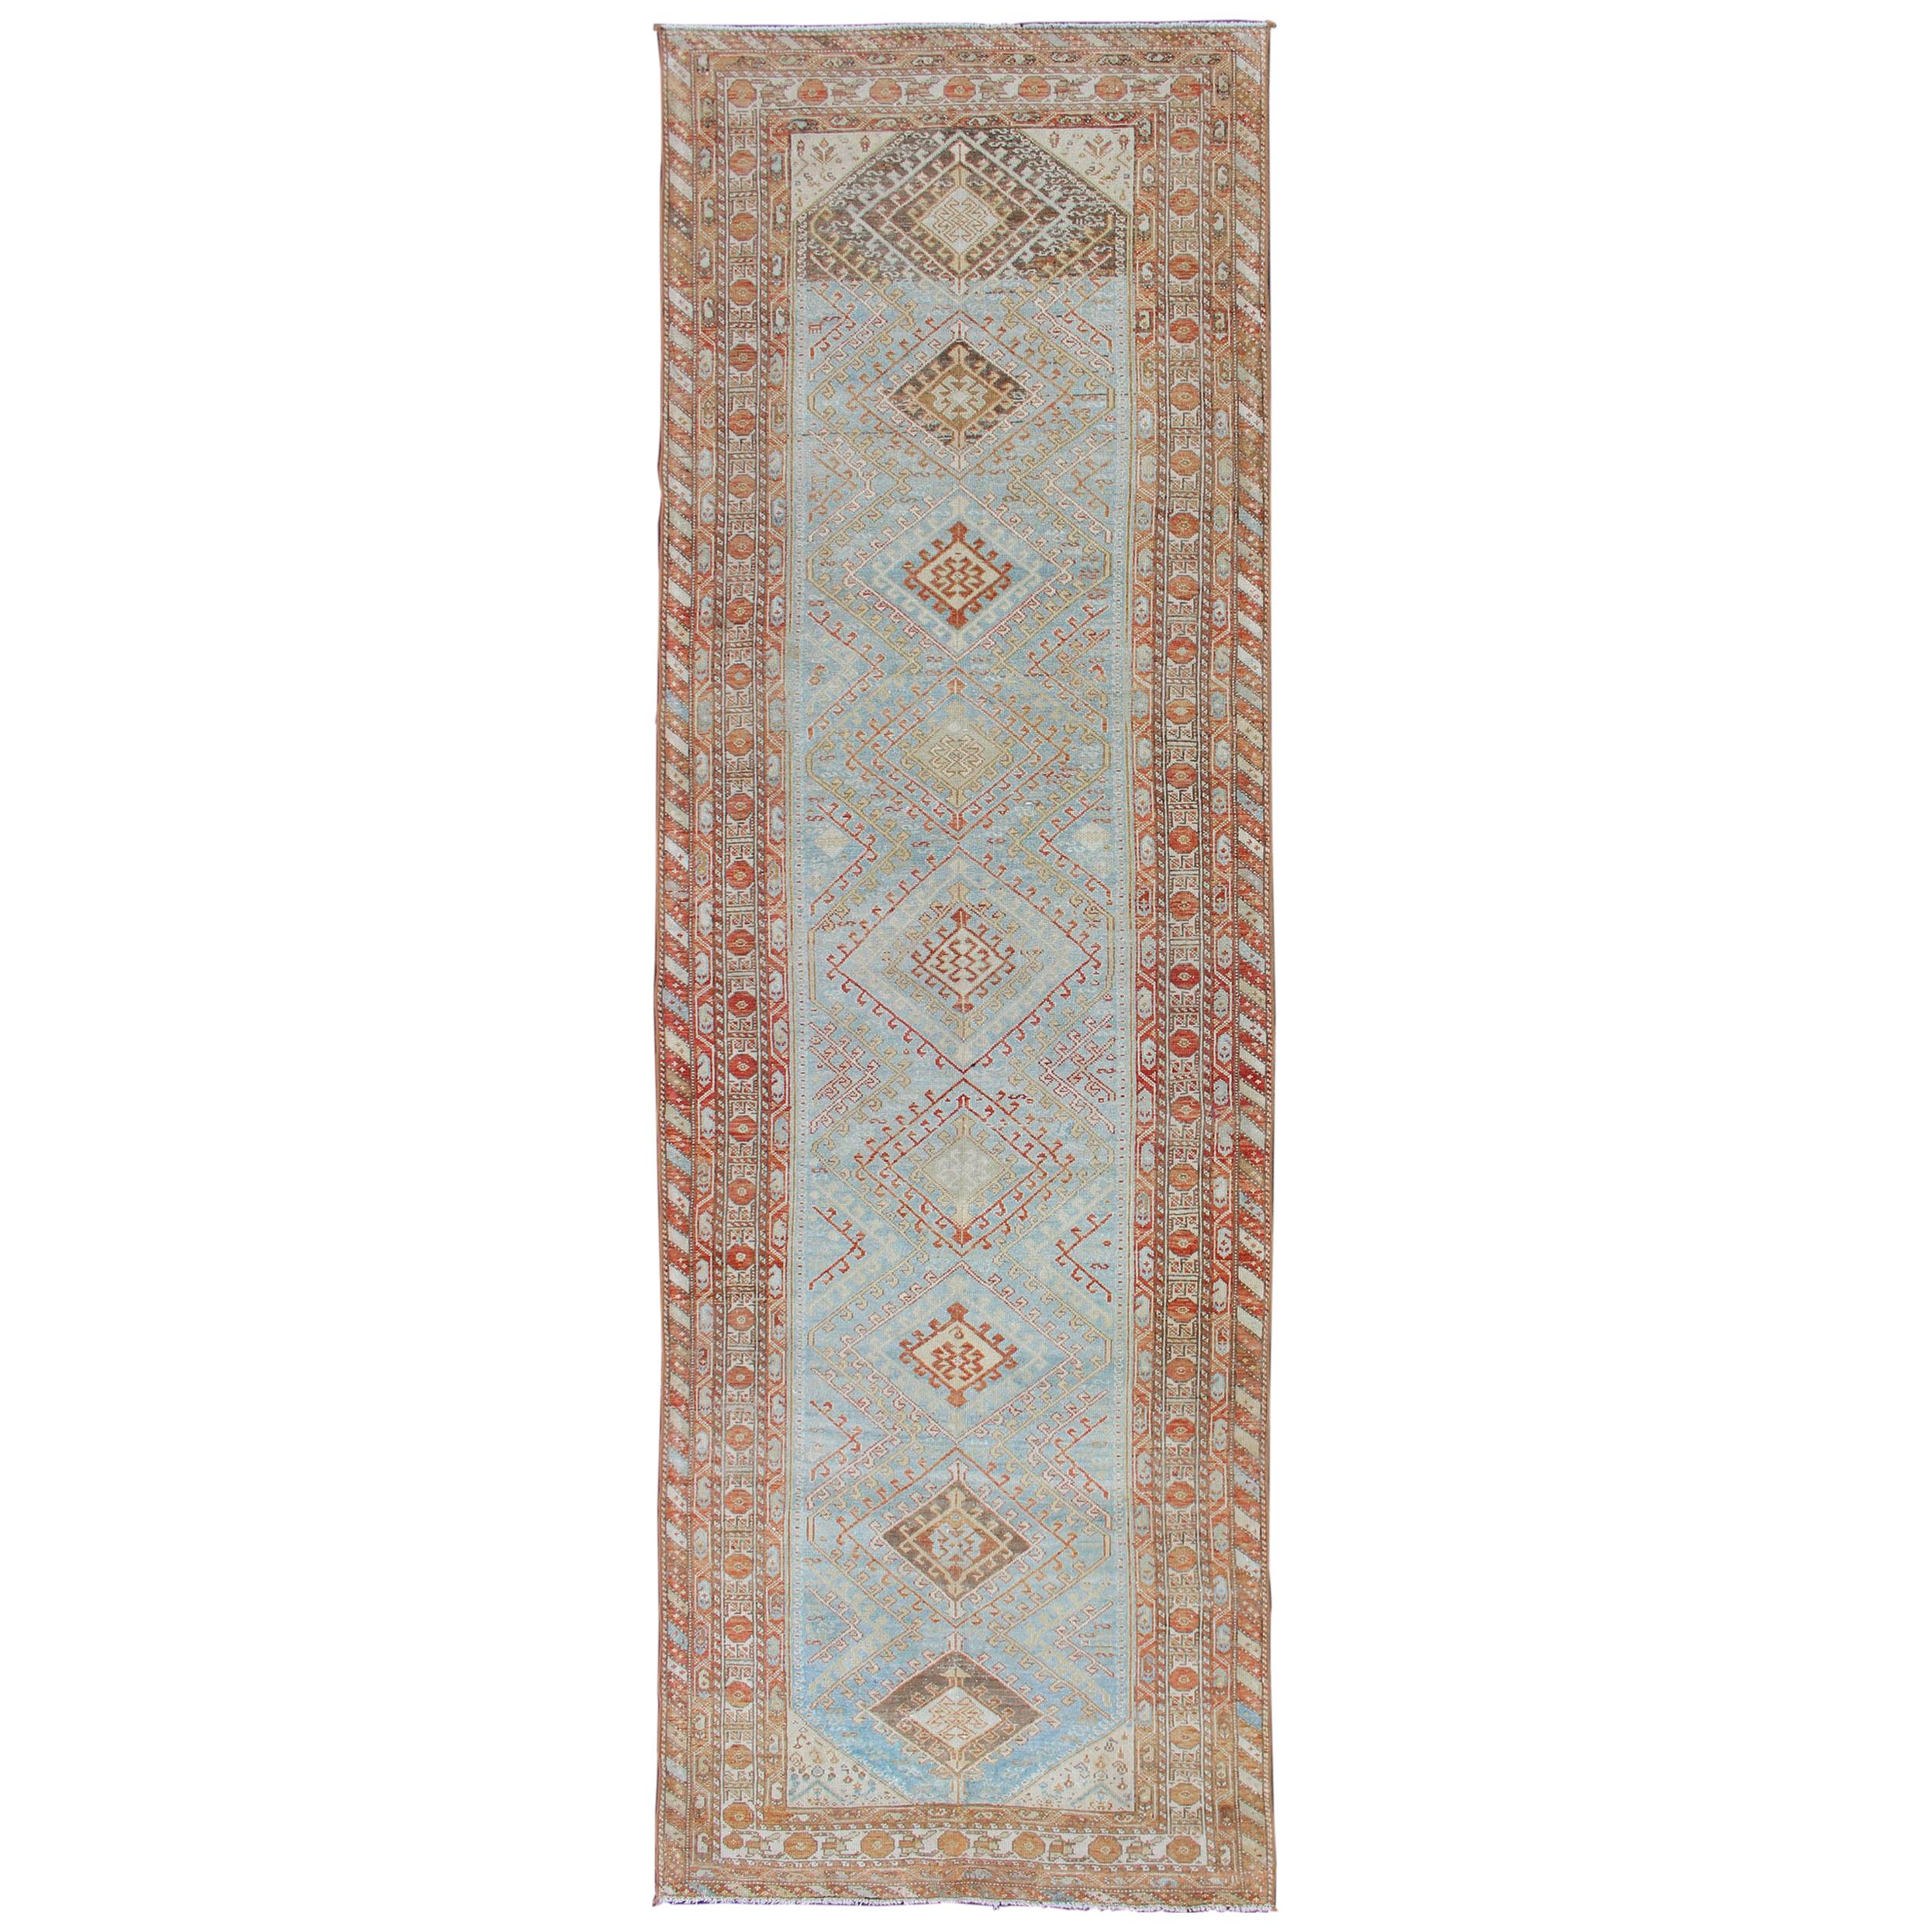 Light Blue and Soft Range Antique Persian Malayer Runner with Geometric Motifs